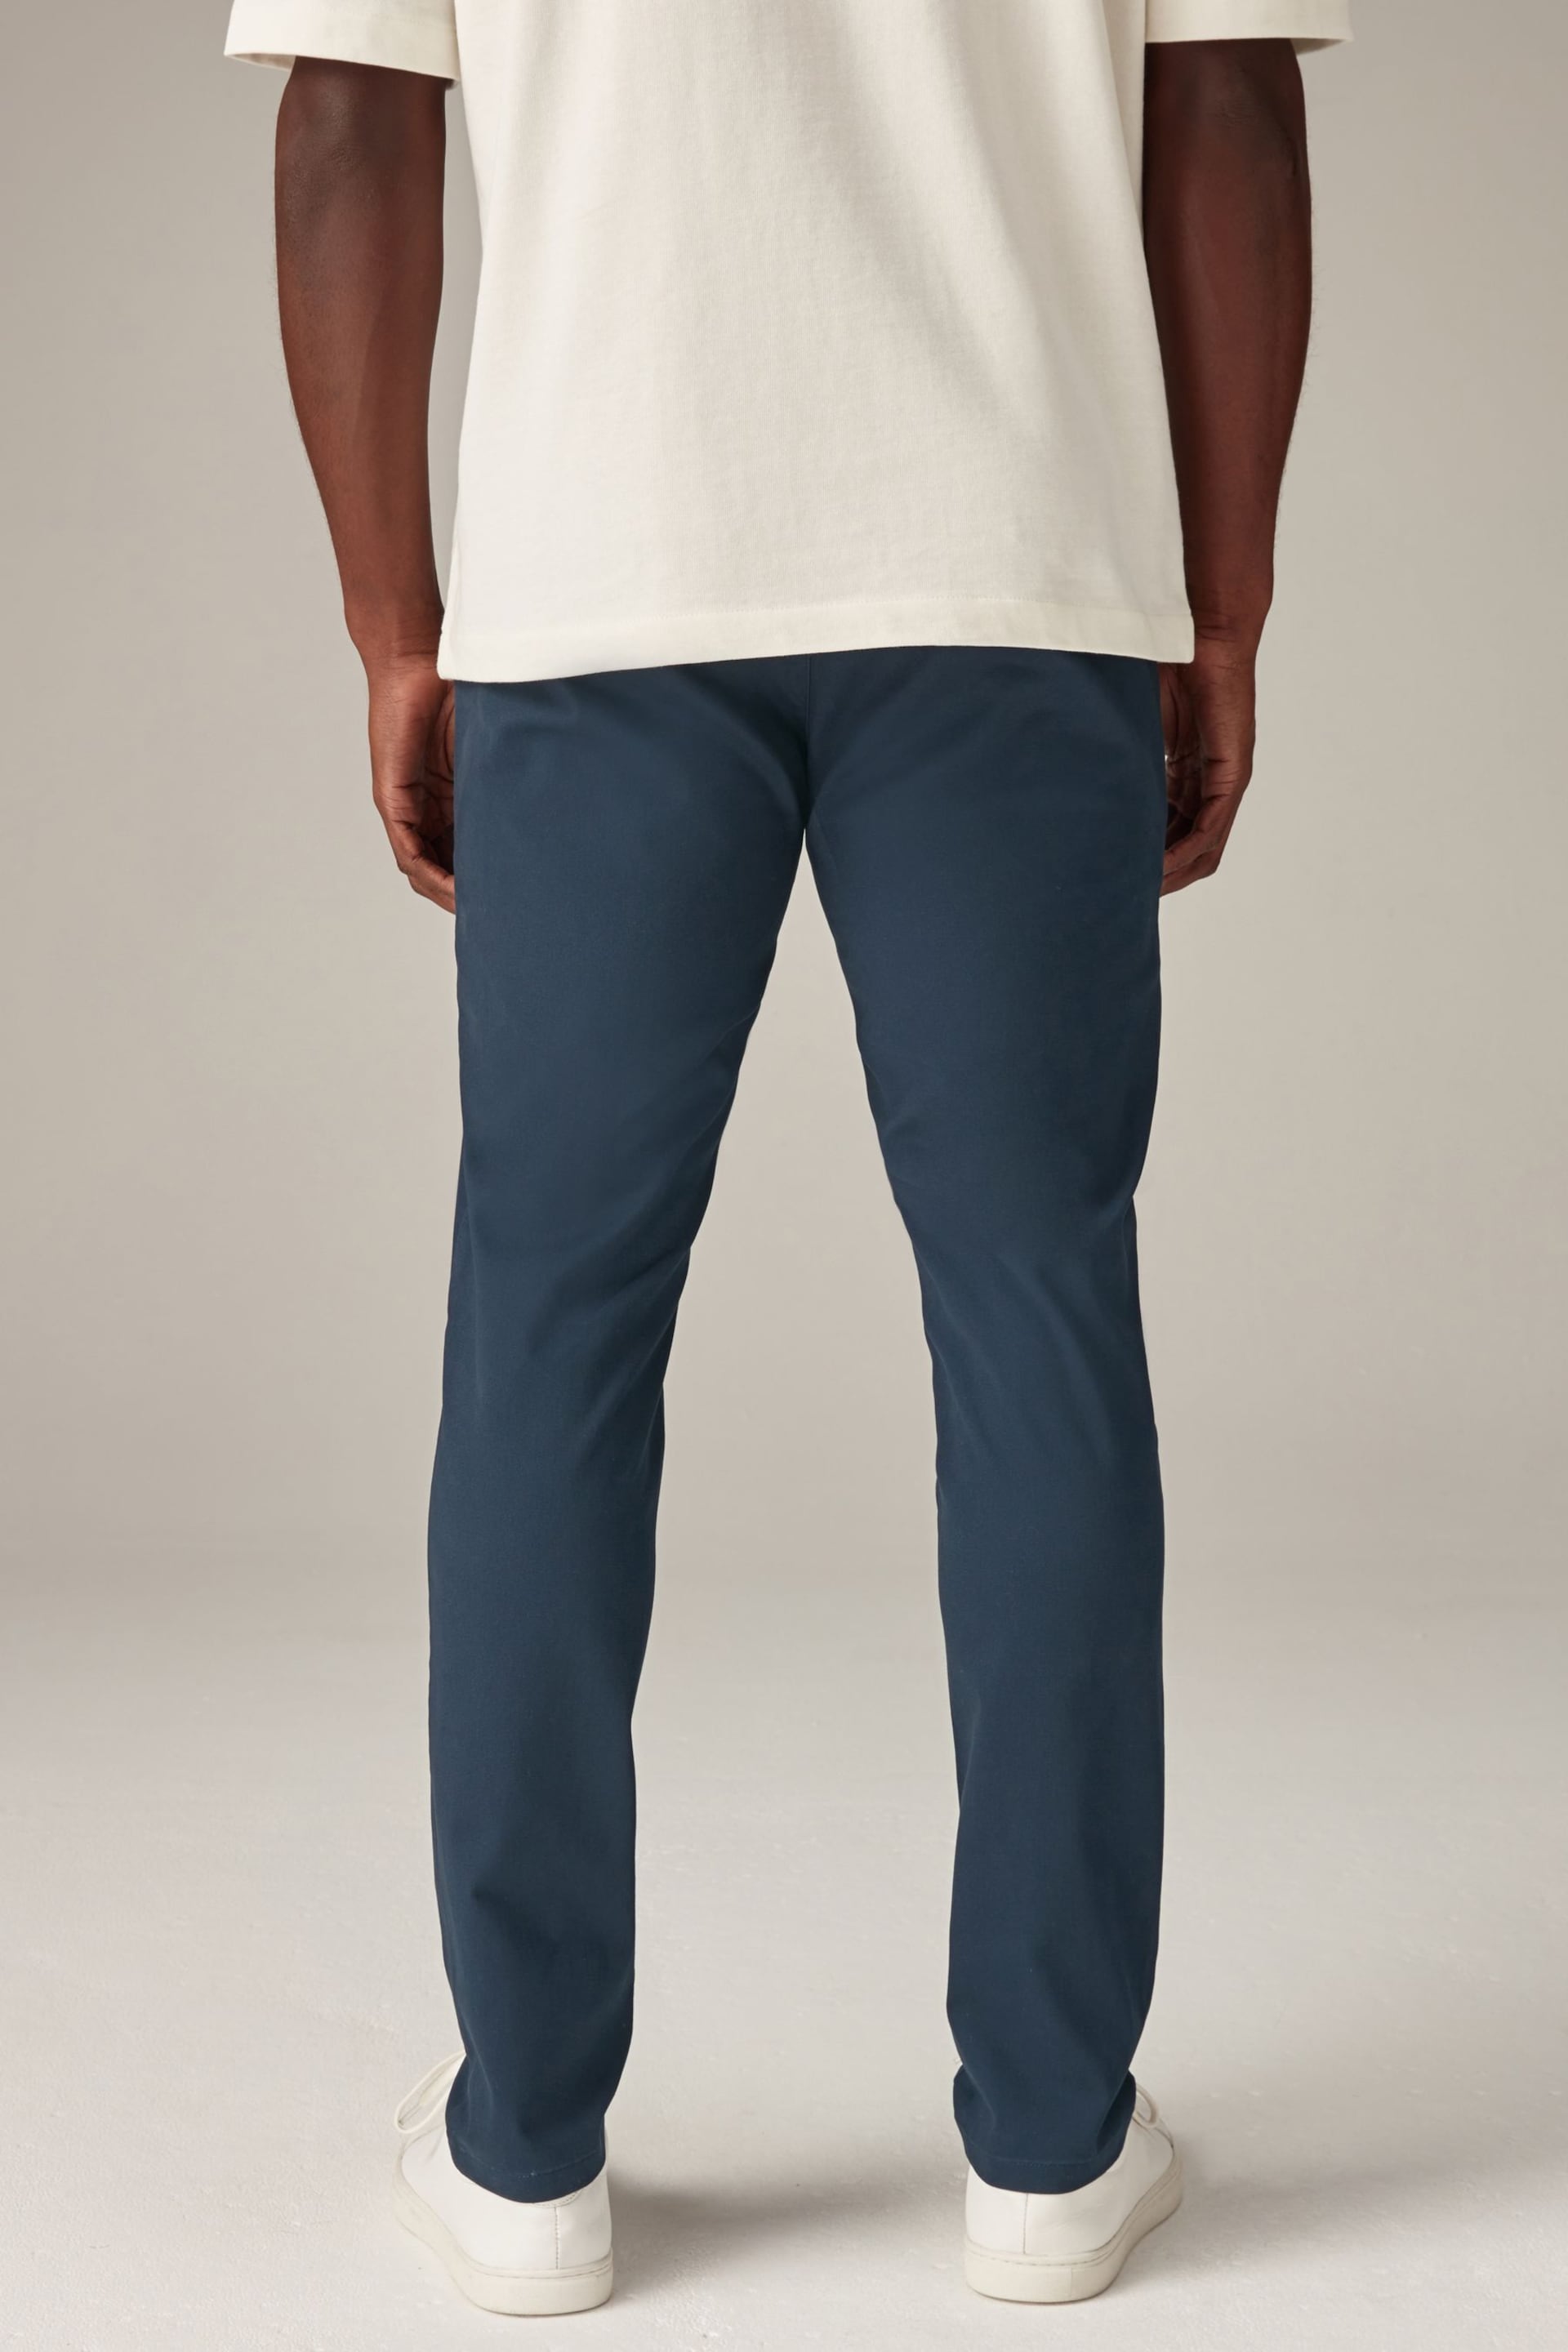 Blue/Light Stone Skinny Stretch Chino Trousers 2 Pack - Image 3 of 15